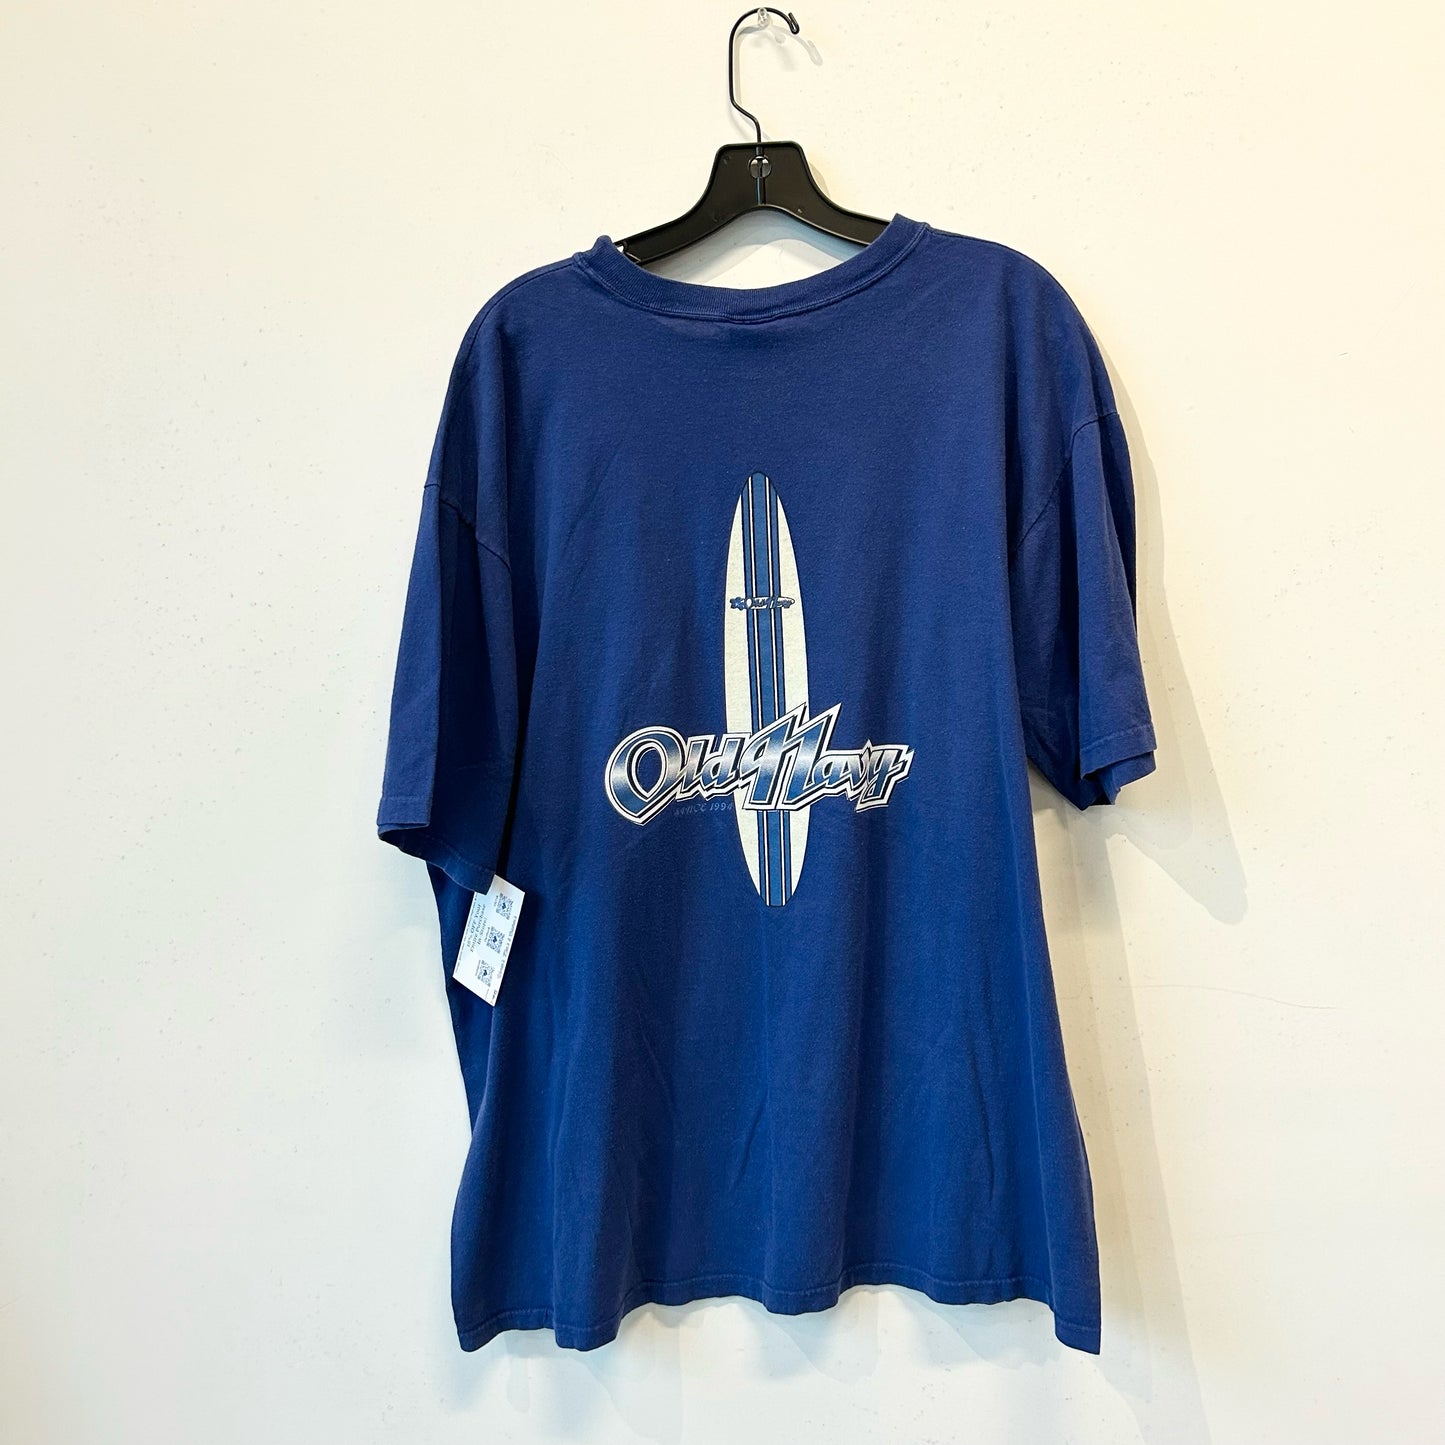 Size 2XL Old Navy Vintage Graphic Tee